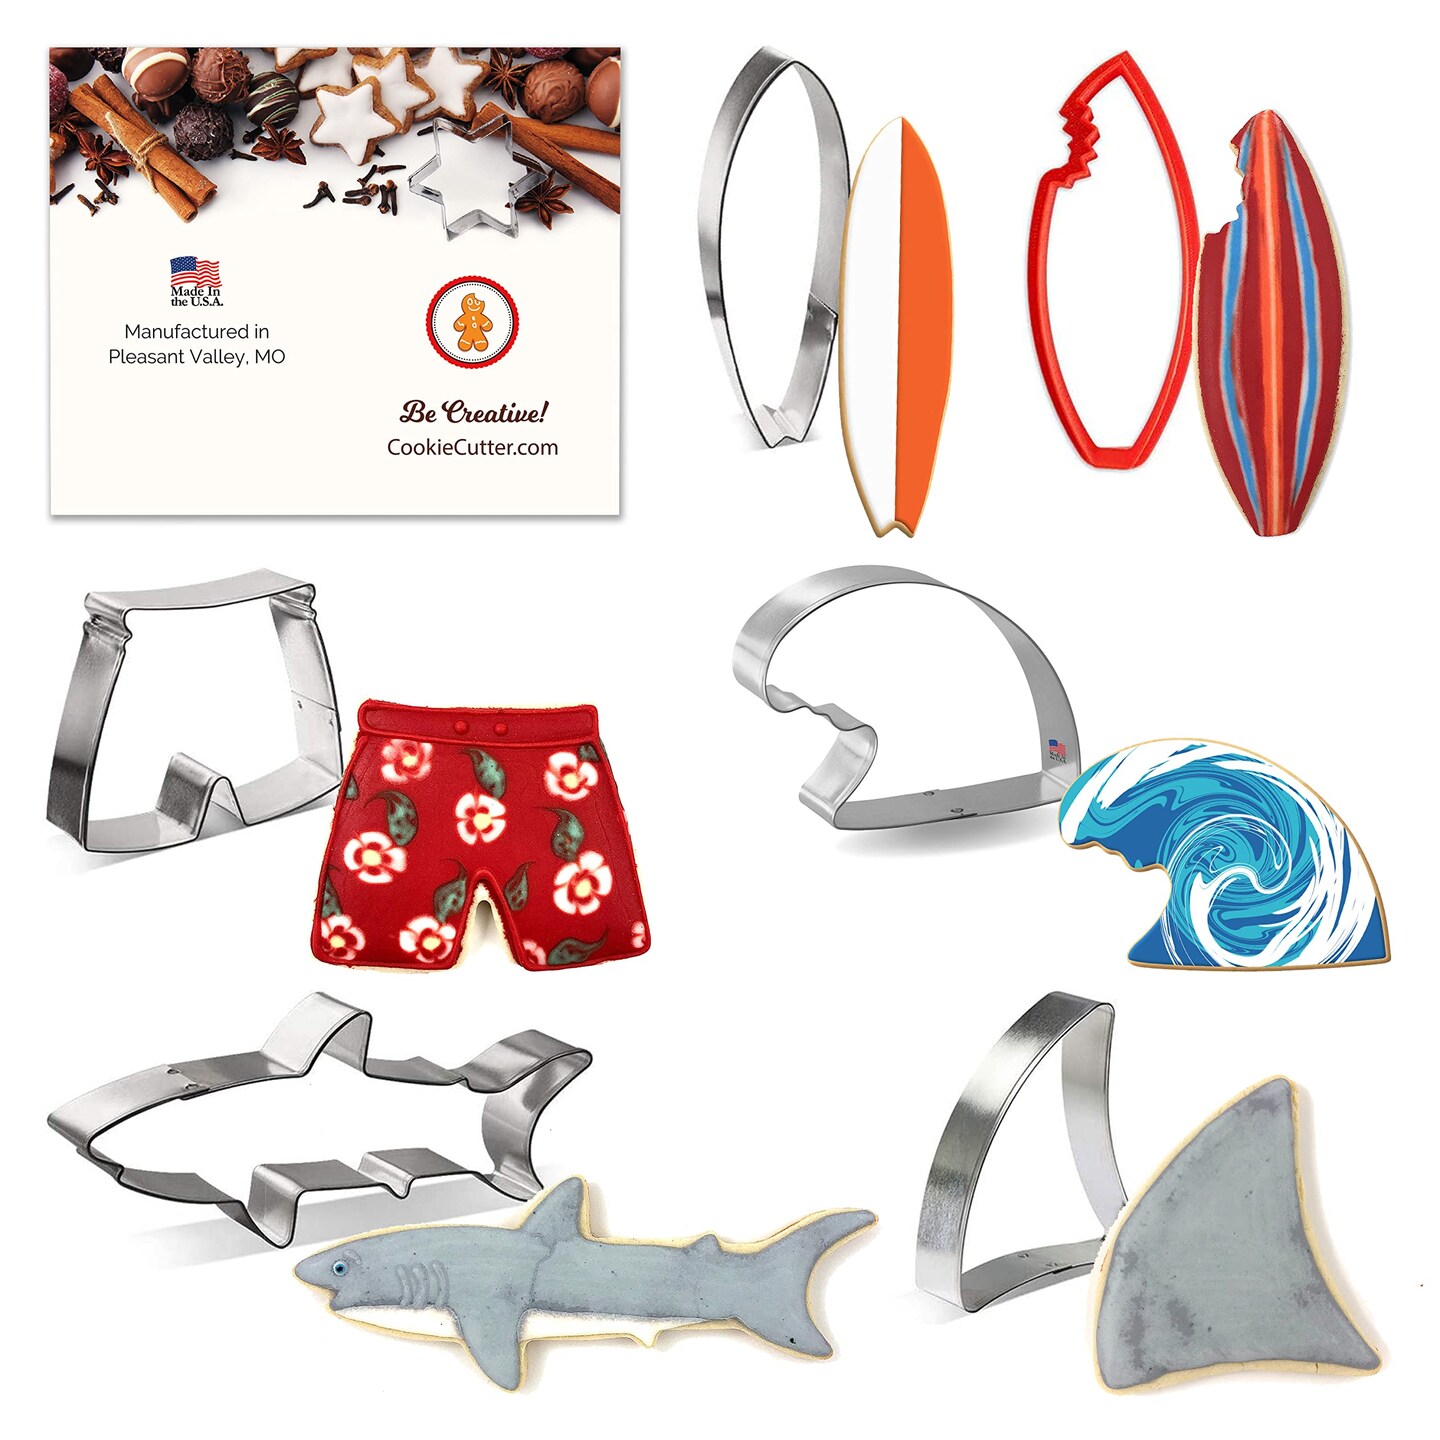 CookieCutter.Com - Surfs Up Cookie Cutter 6 Pc Set &#x2013; 5.75 in Shark, 3.5 in Shark Fin, 5 in Surfboard, 5 in Surfboard with Bite, 3.5 in Swimming Trunks, 4.25 in Wave